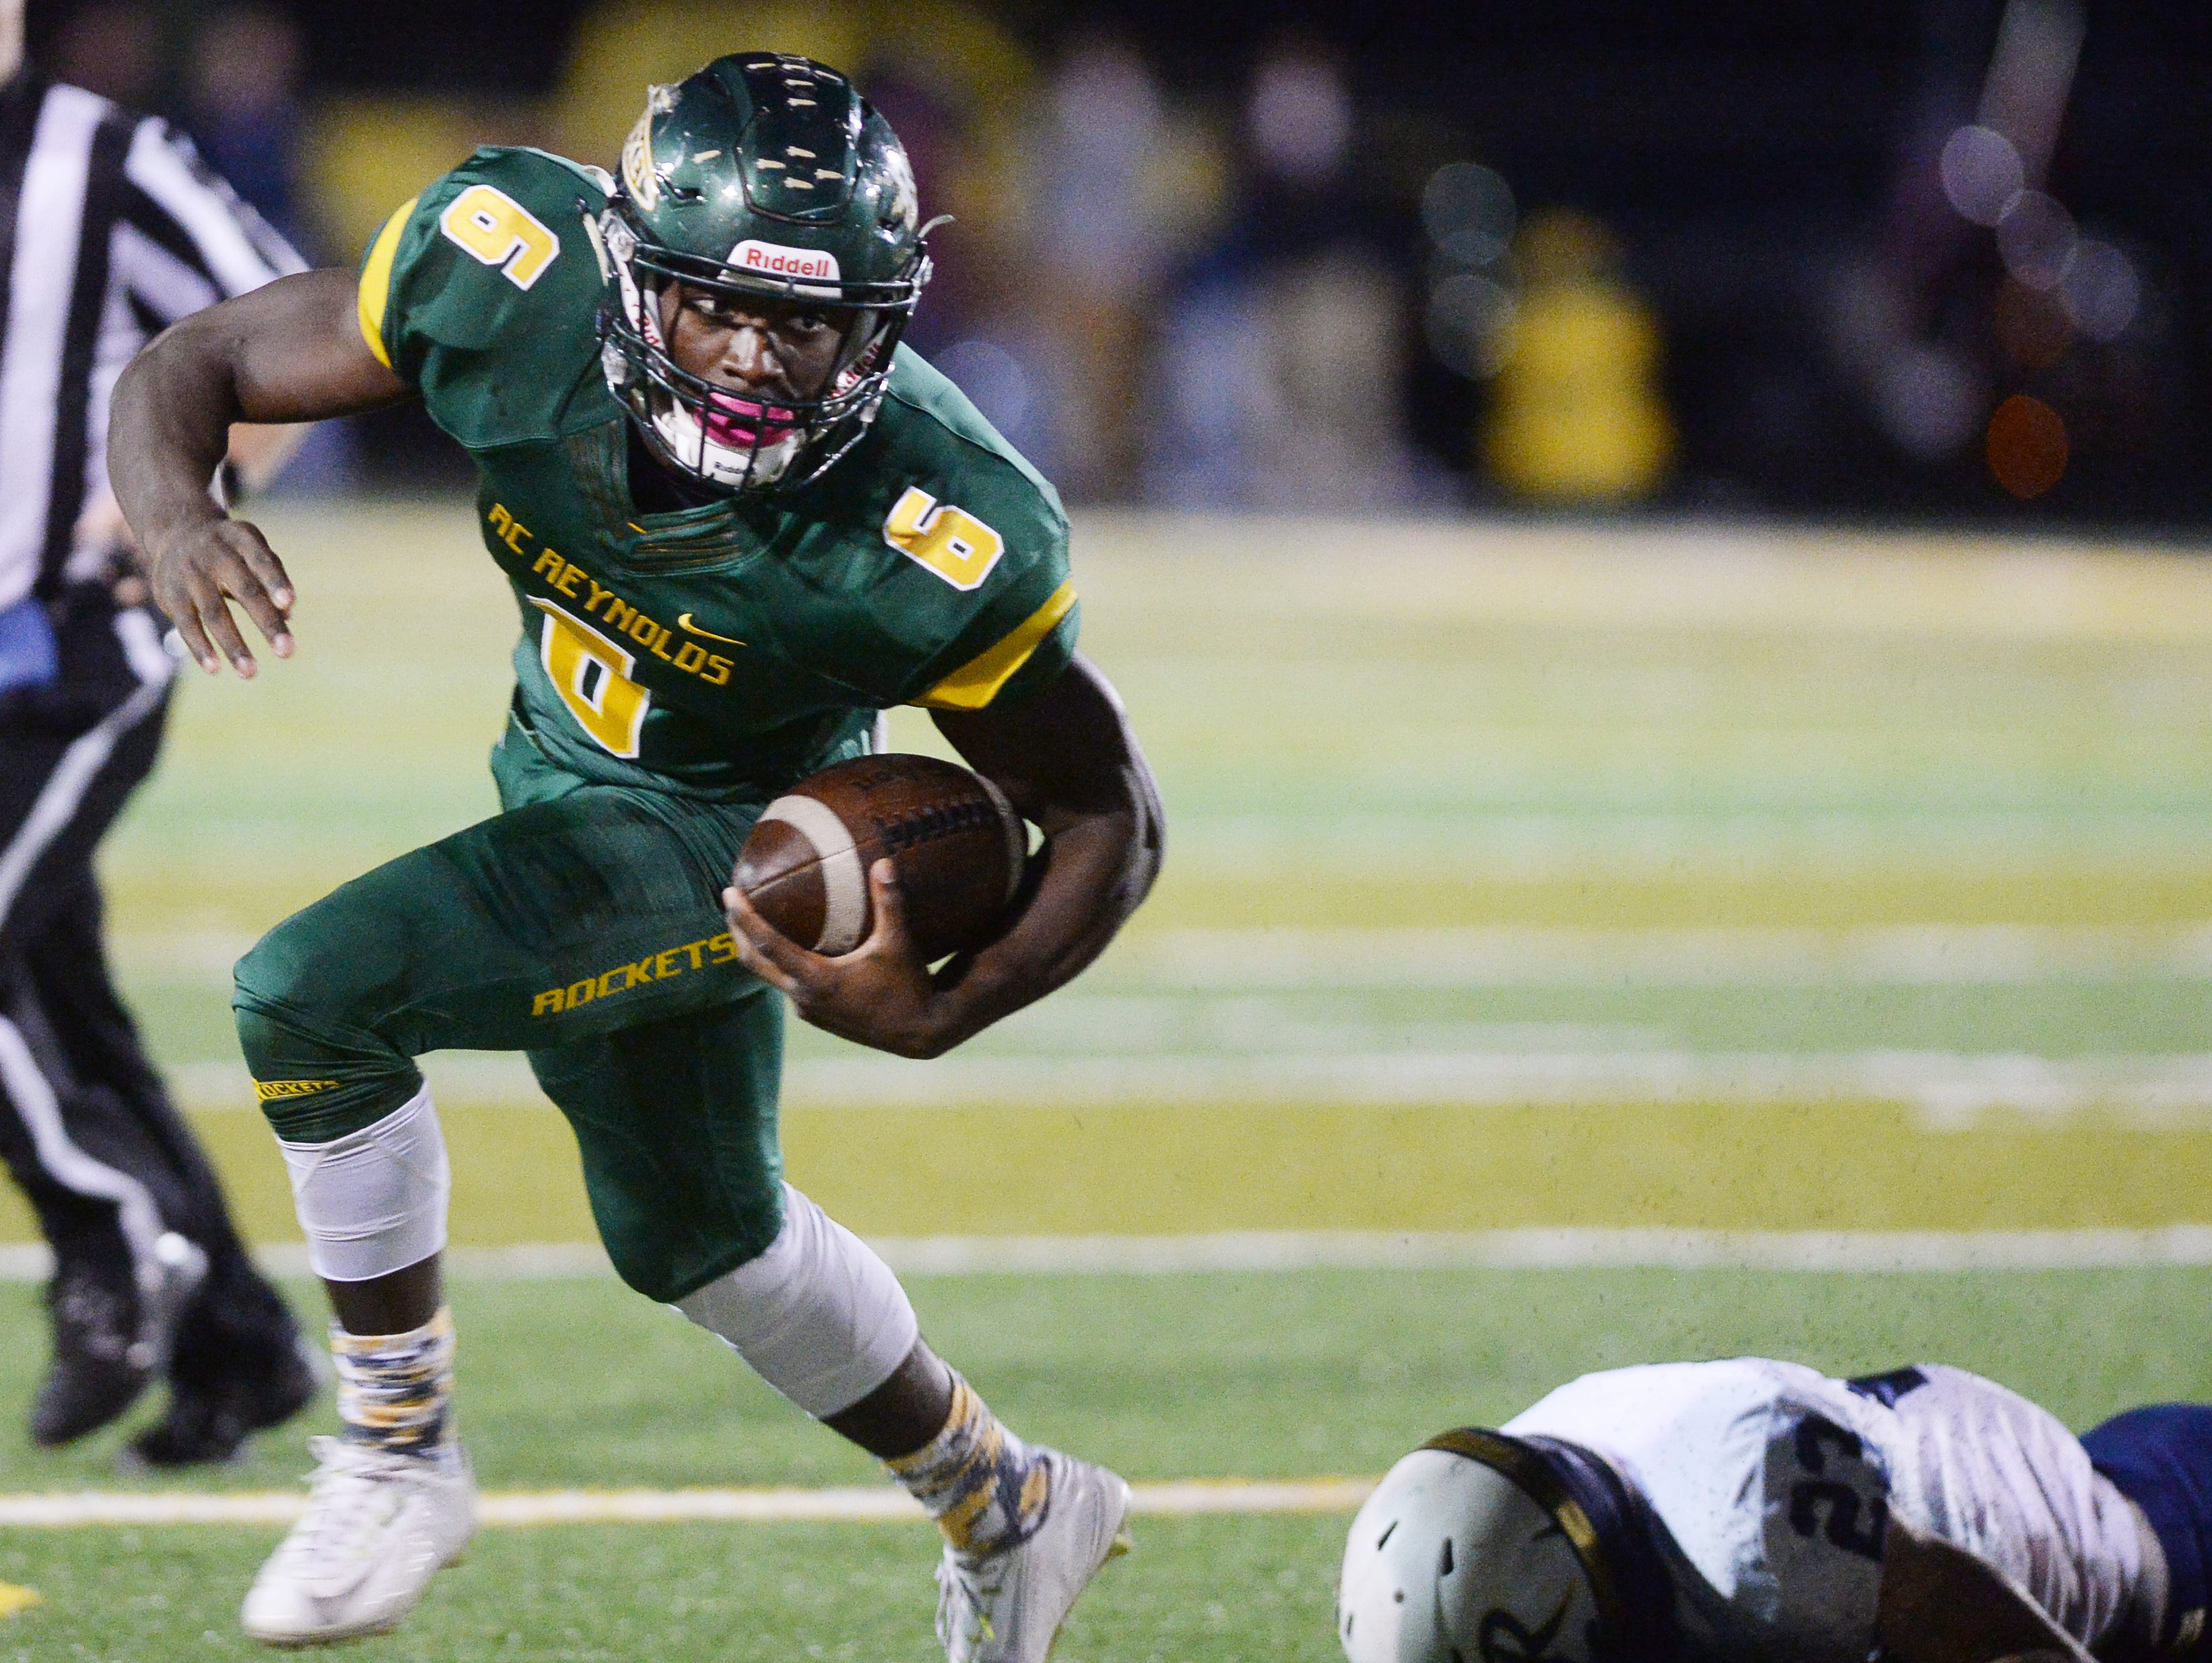 Reynolds' Sean Jones rushed for 146 yards in Thursday's 38-6 home win over Roberson.